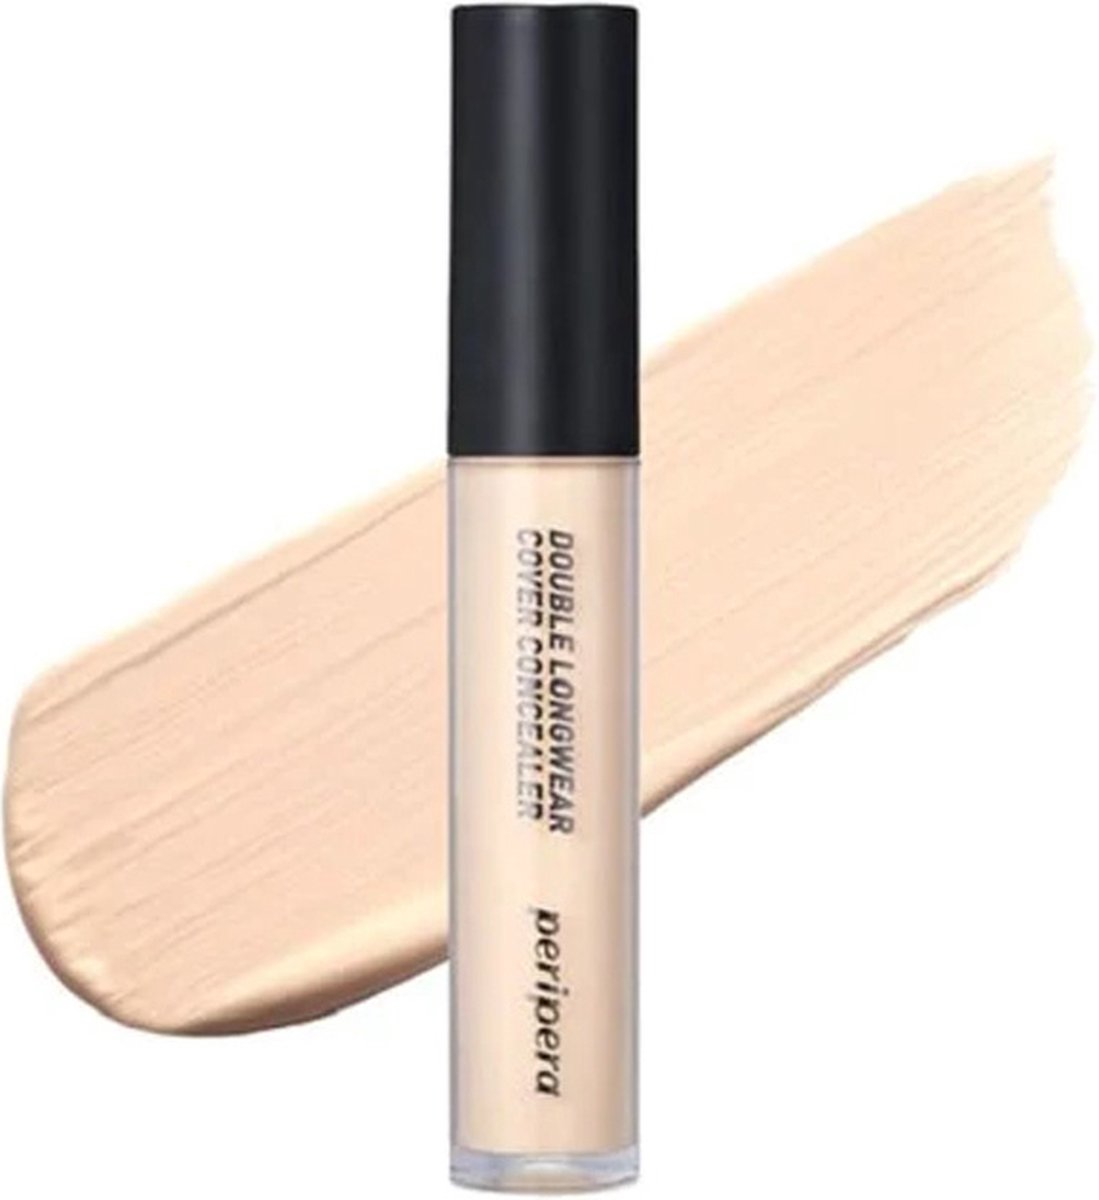 Peripera Double Longwear Cover Concealer 01 Pure Ivory 5.5g